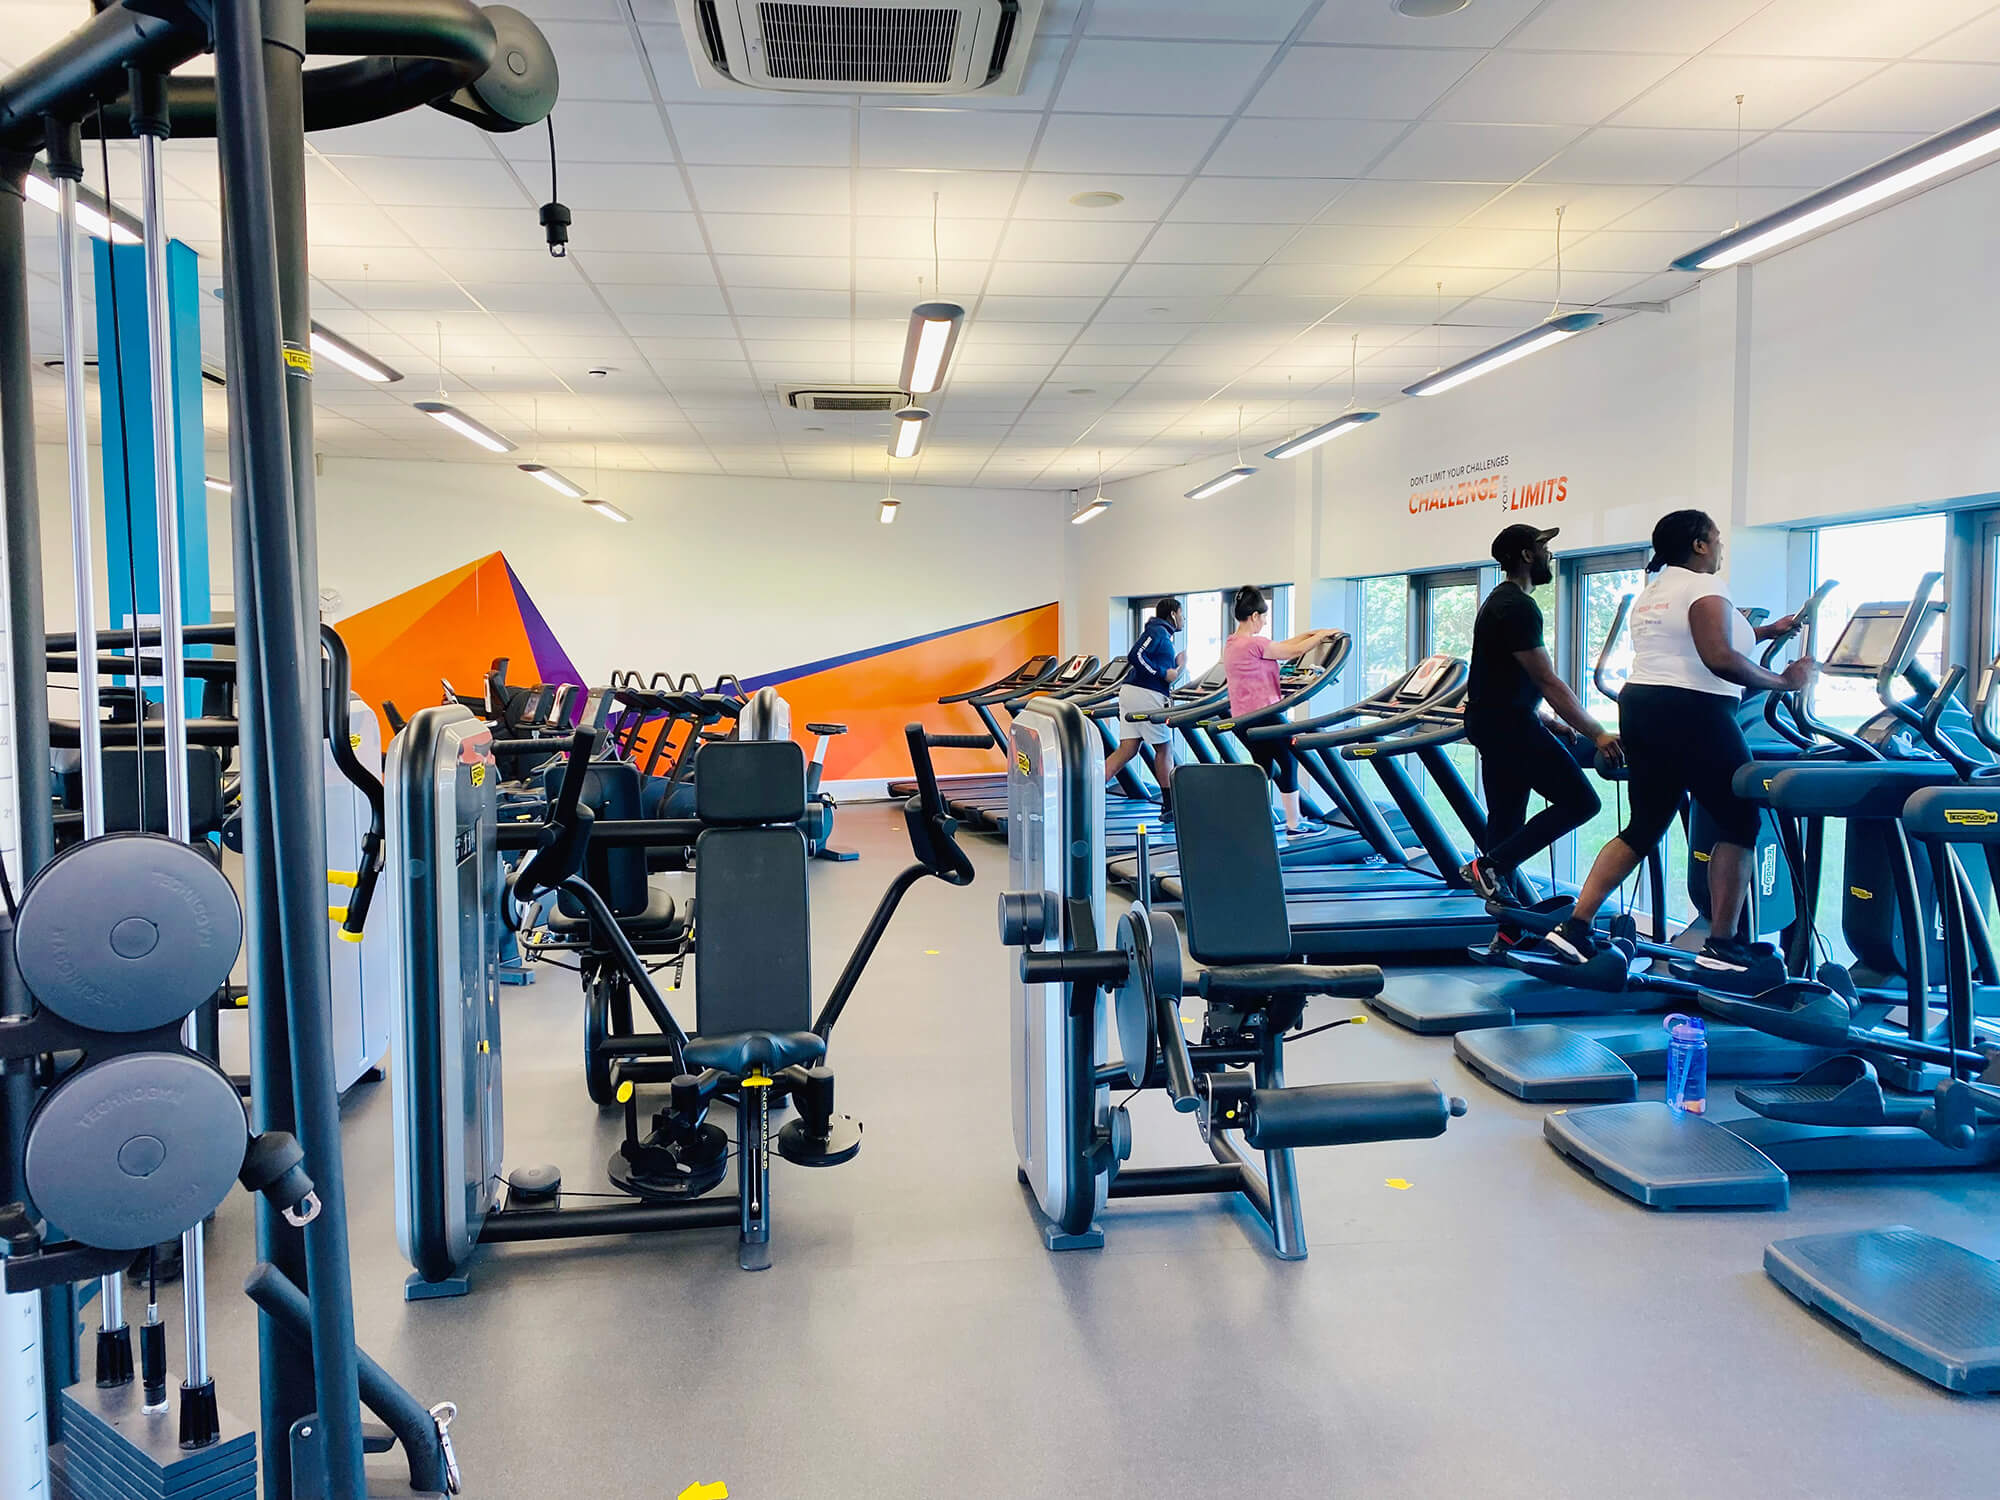 Moat House Fitness Suite with customers using treadmill and leg machines